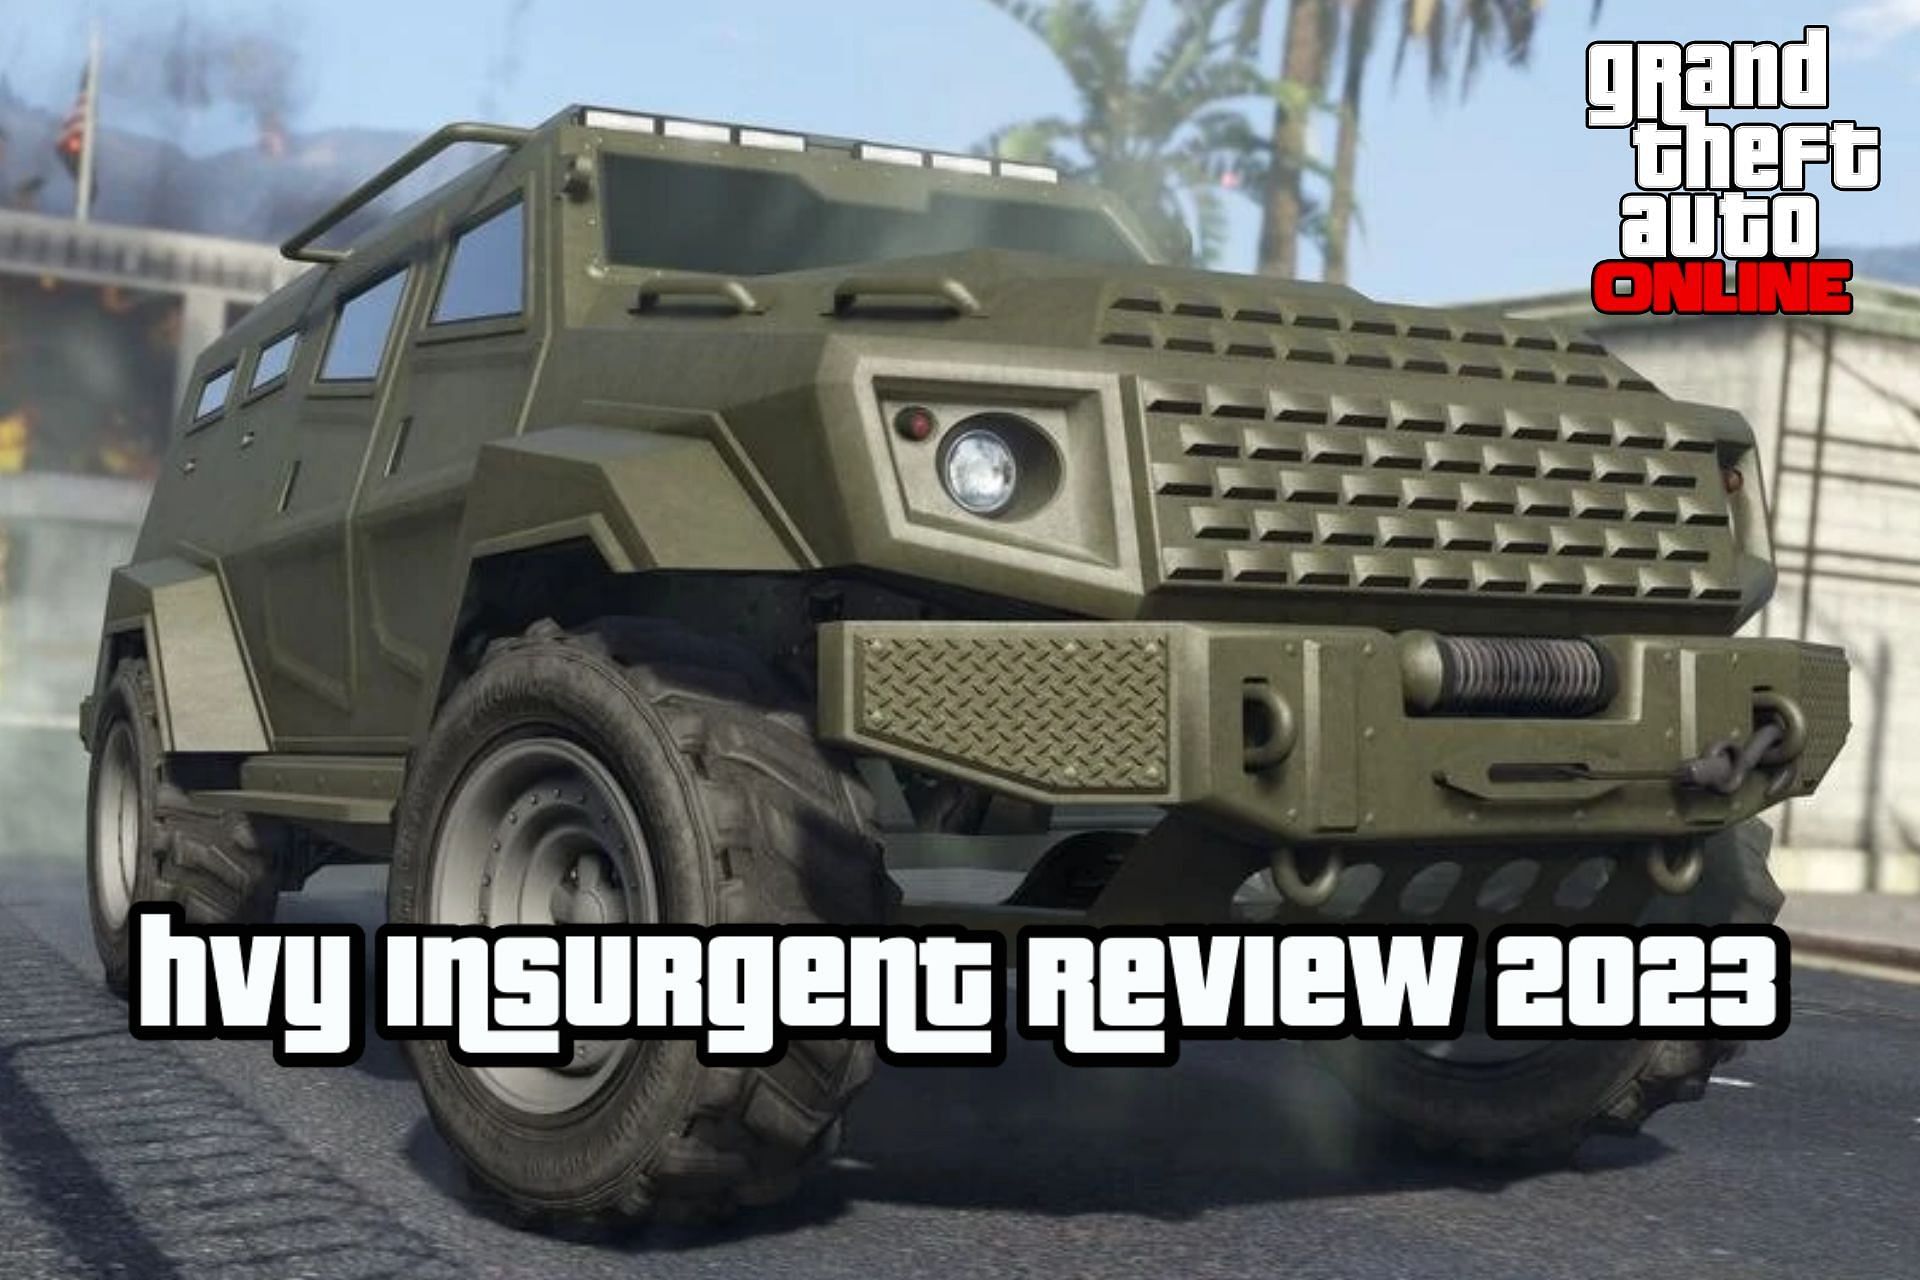 The HVY Insurgent is one of the best armored vehicles in GTA Online (Image via GTA Fandom)